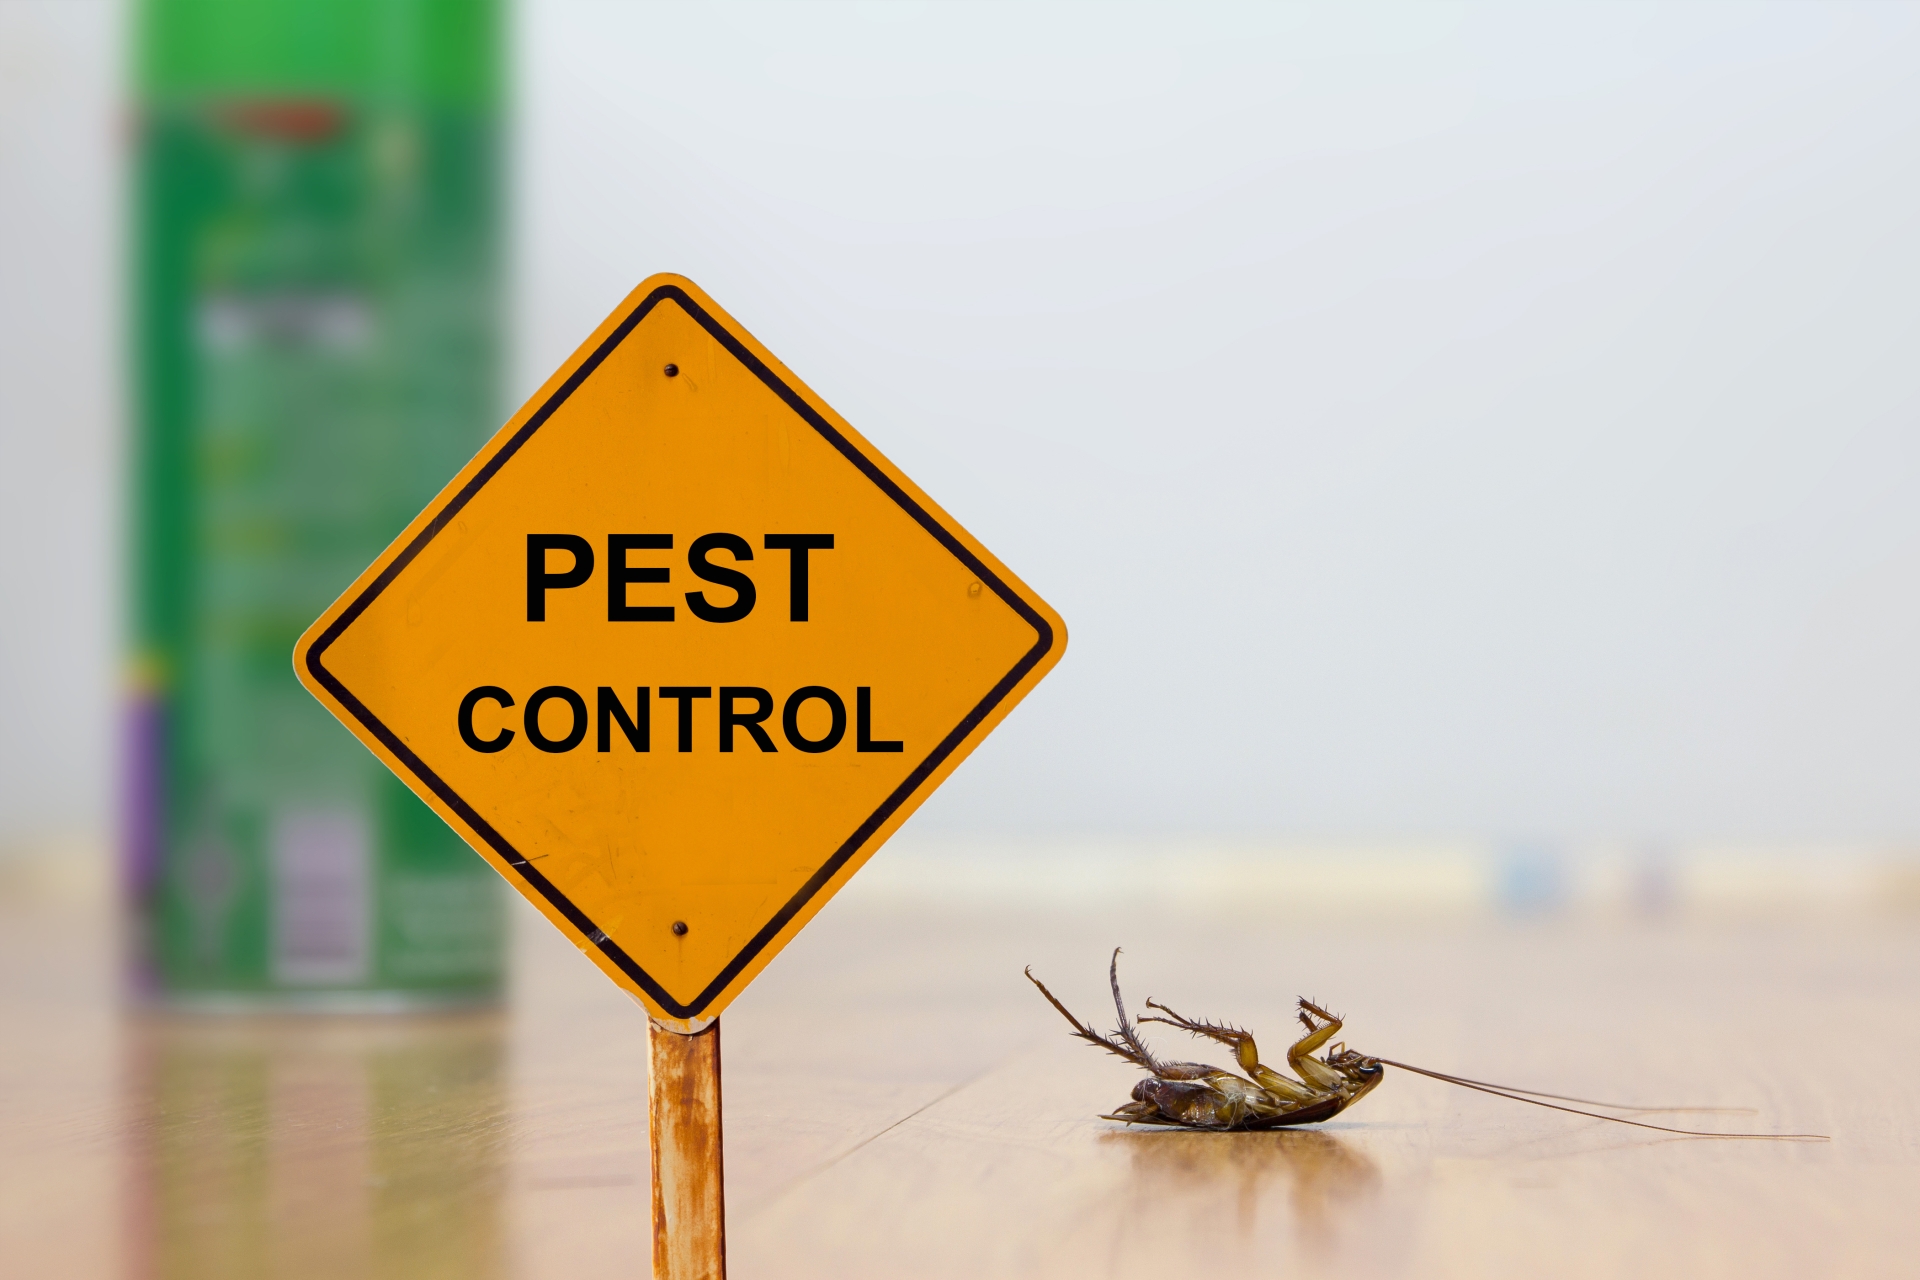 24 Hour Pest Control, Pest Control in Walthamstow, E17. Call Now 020 8166 9746